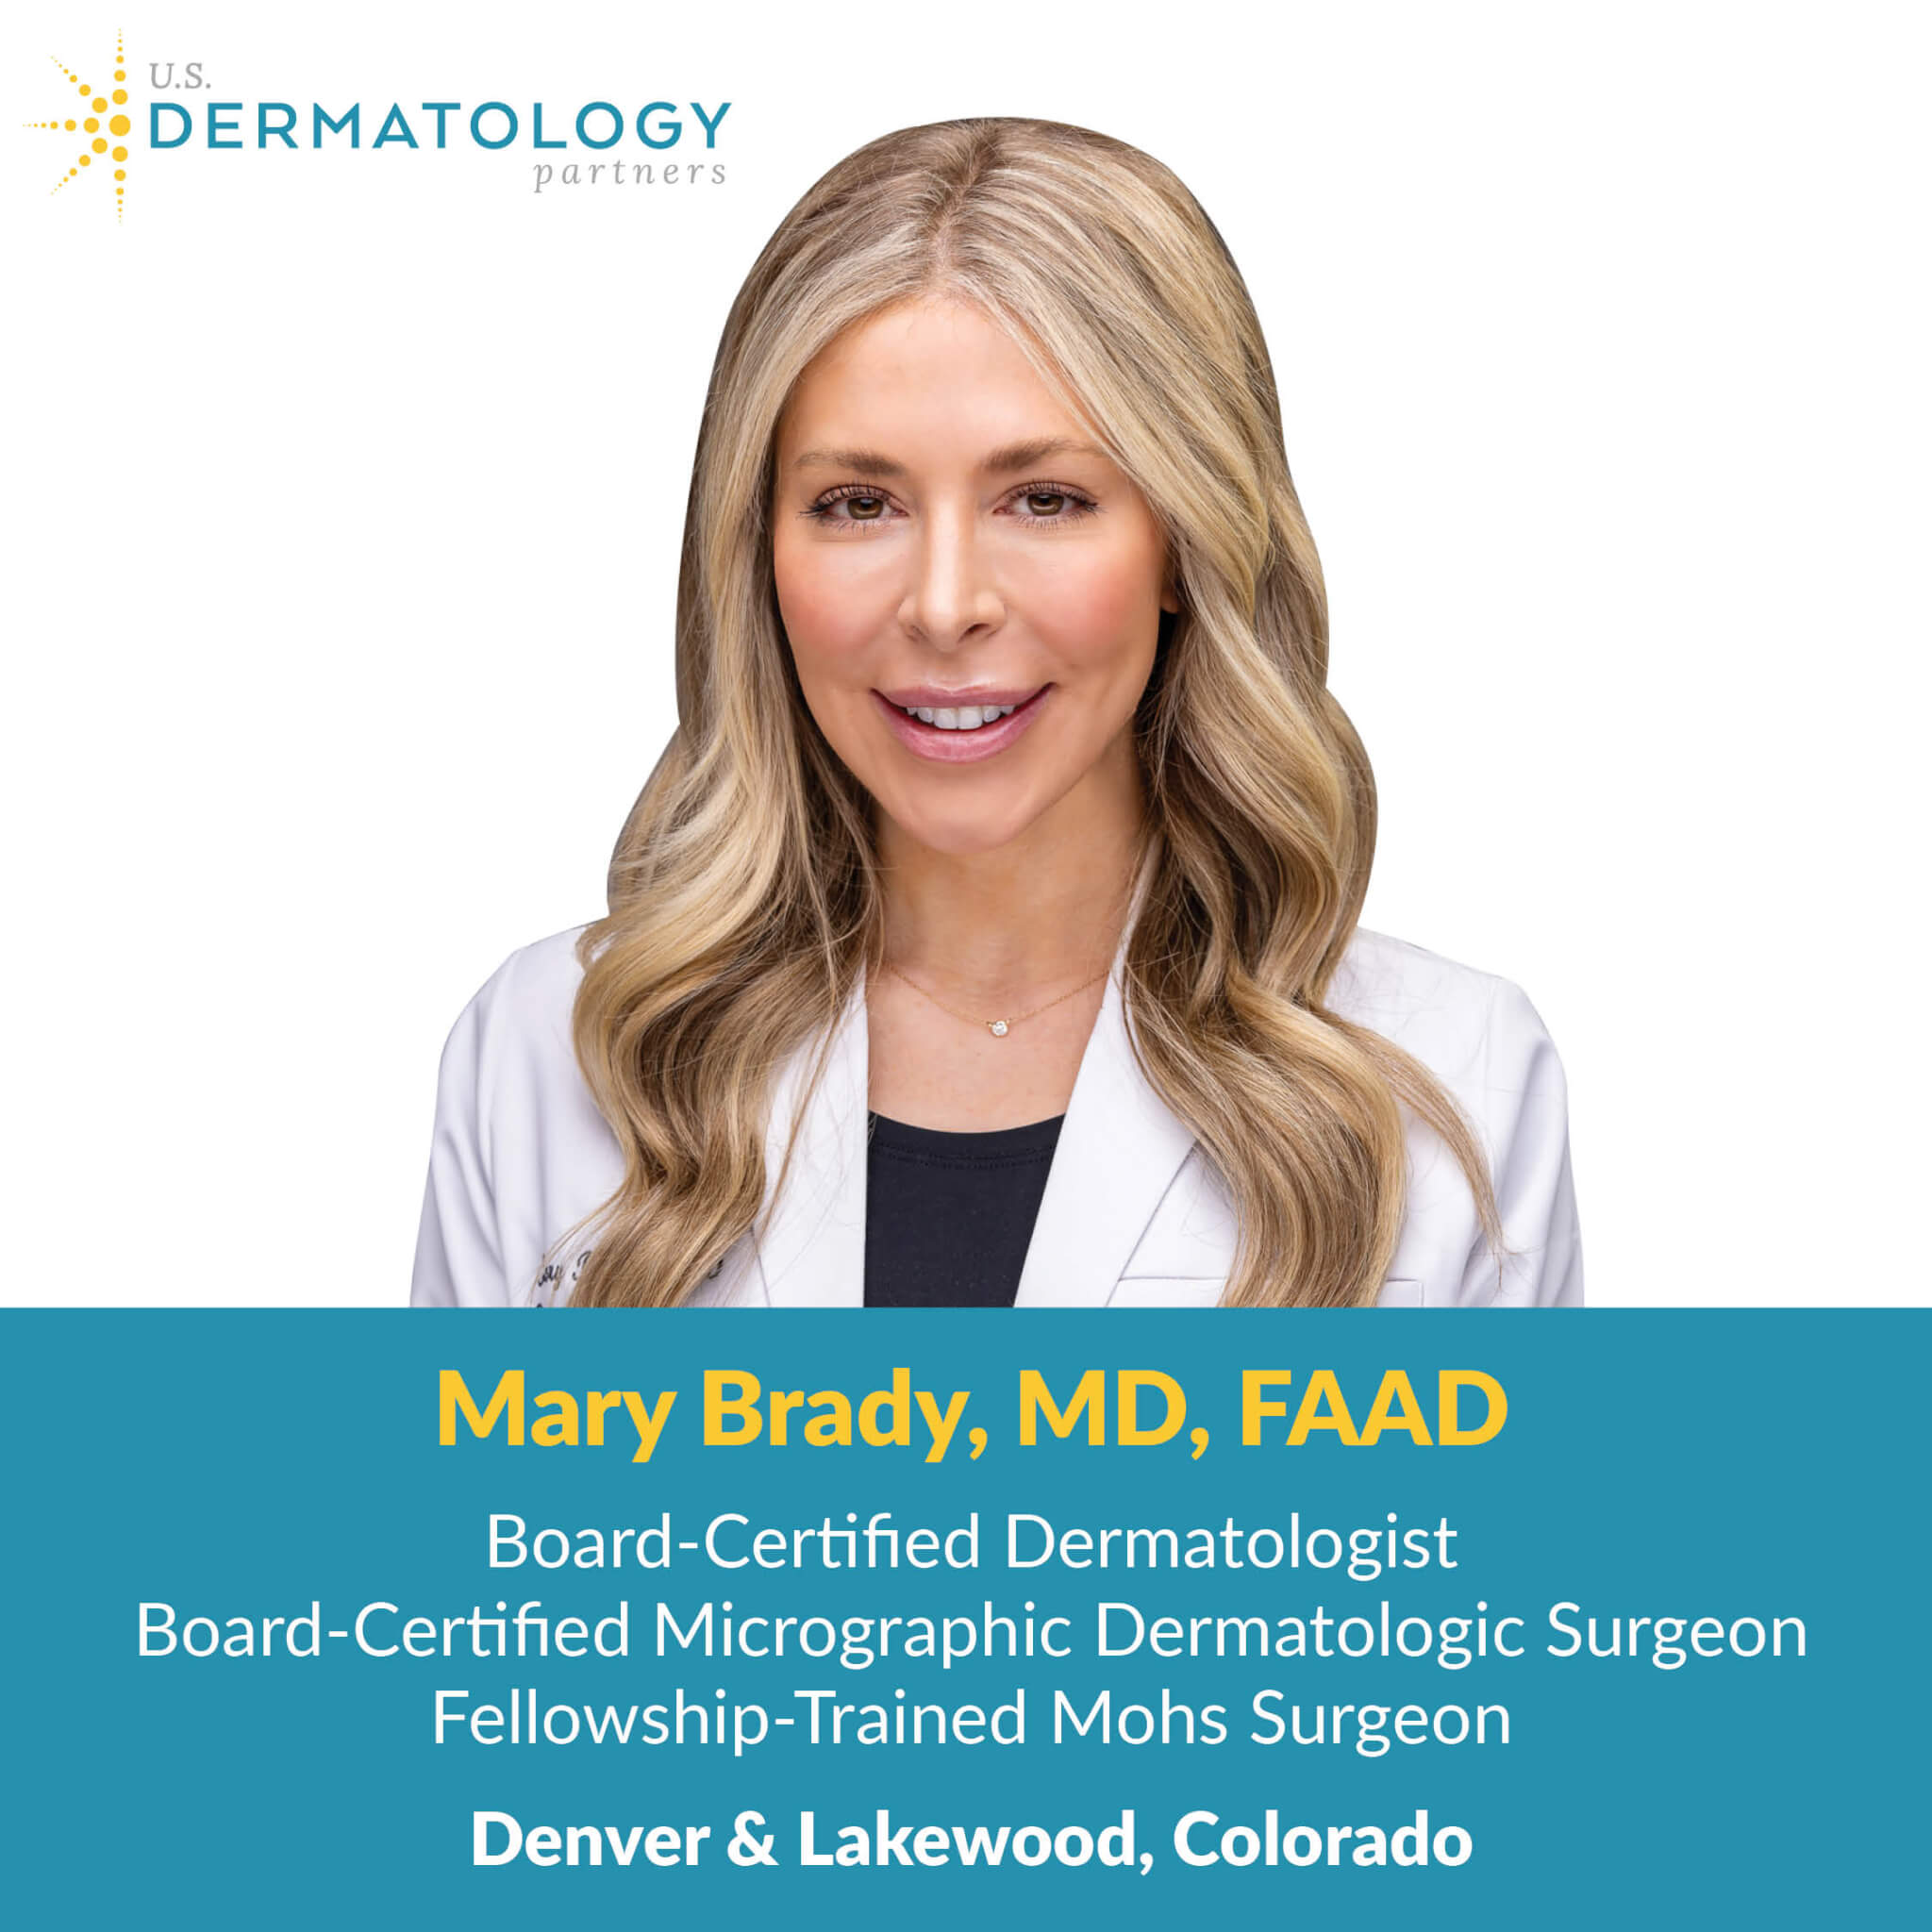 Mary Brady, MD is a Board-Certified Dermatologist and Fellowship-Trained Mohs Surgeon in Lakewood, Colorado.